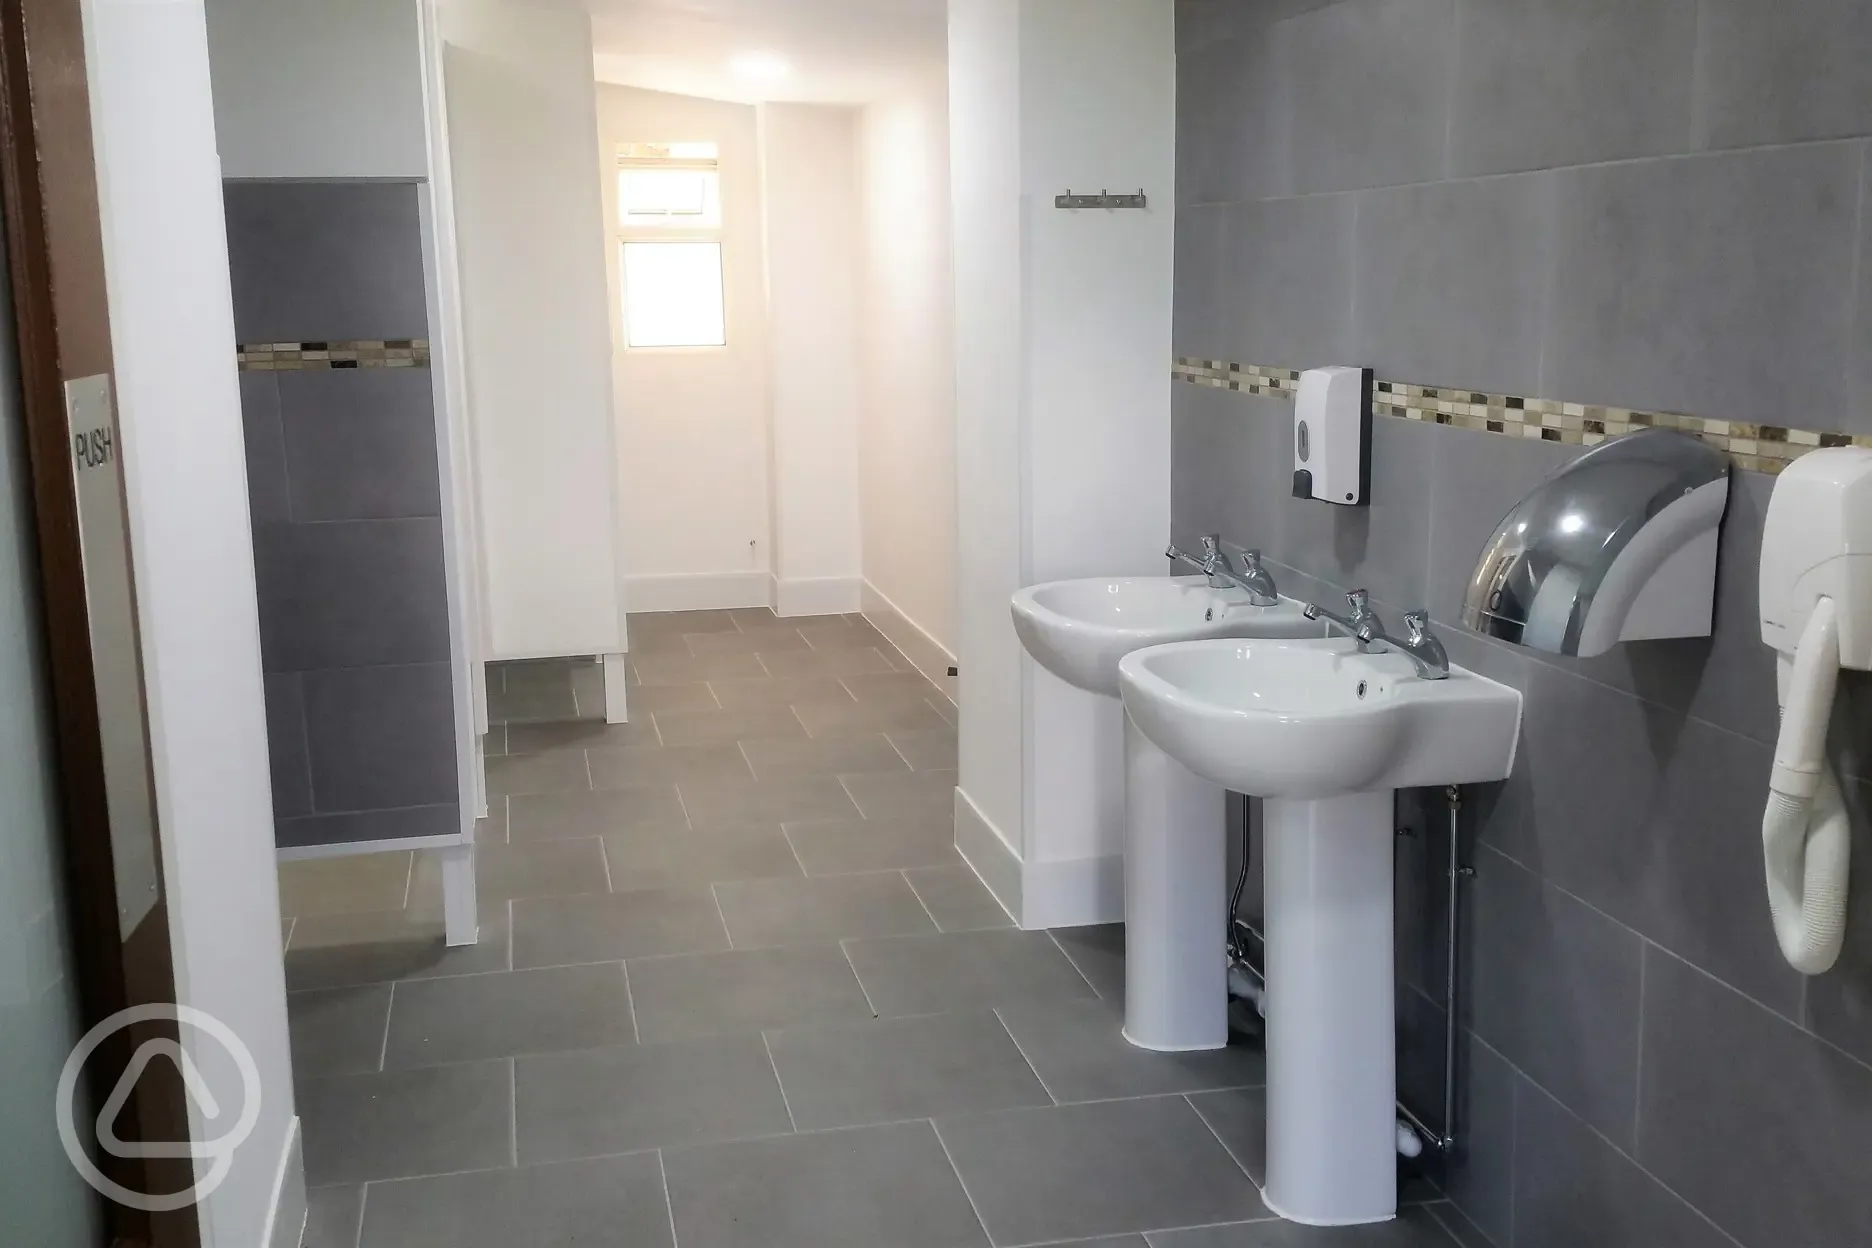 Pristine toilet and shower facilities inc disabled room